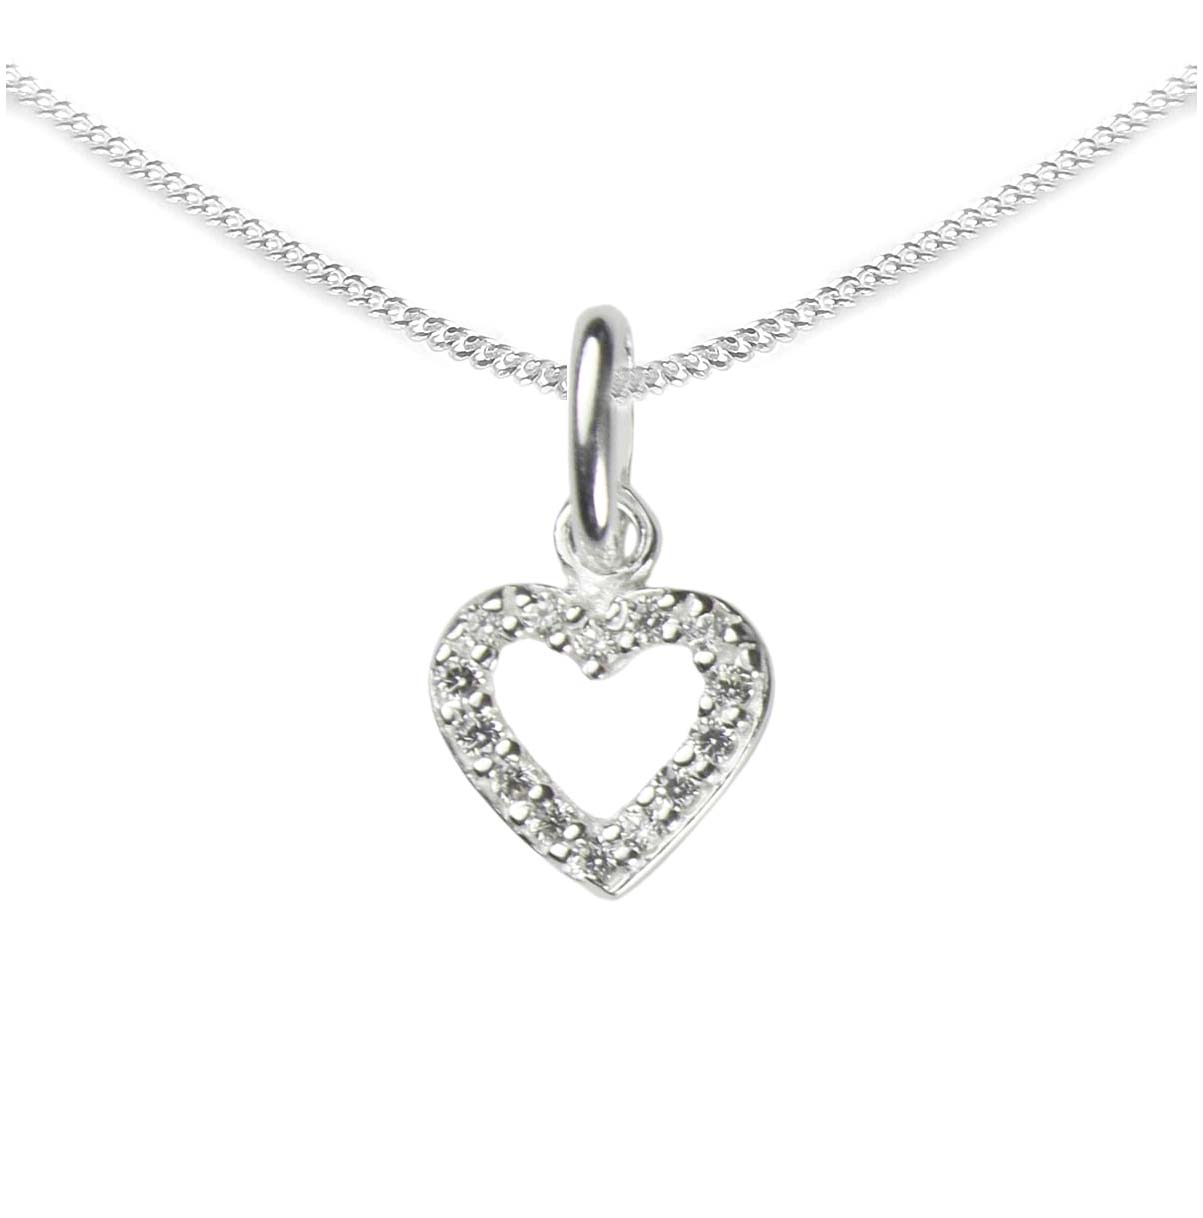 13th Birthday Heart Necklace with Cubic Zirconia in Sterling Silver 925, Personalised Gift